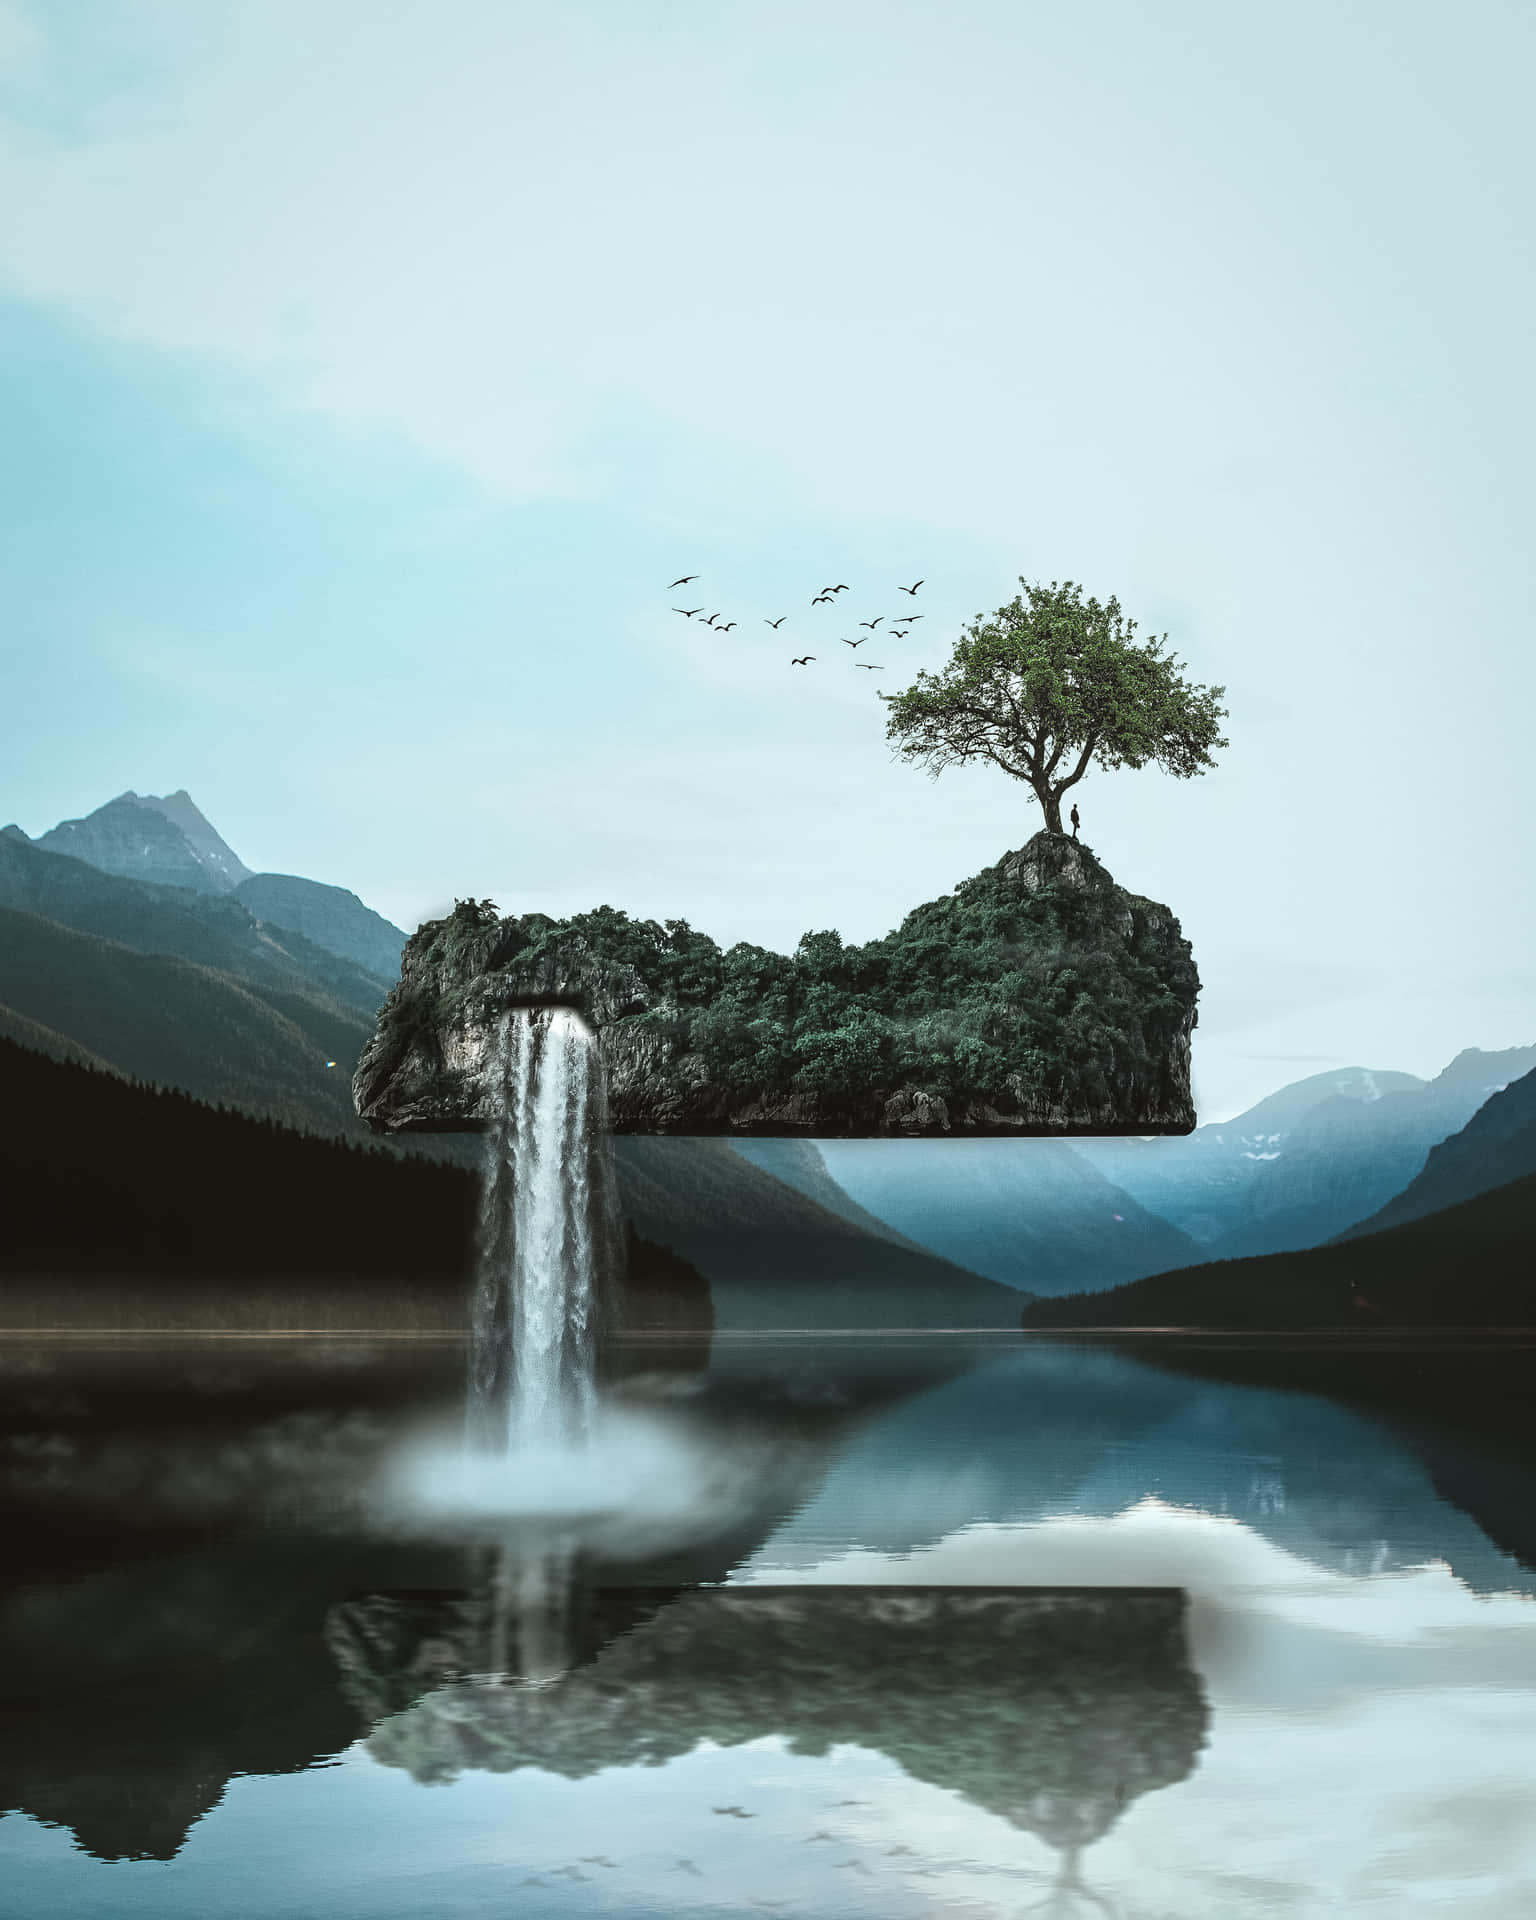 "A dreamy view of a Floating Island"